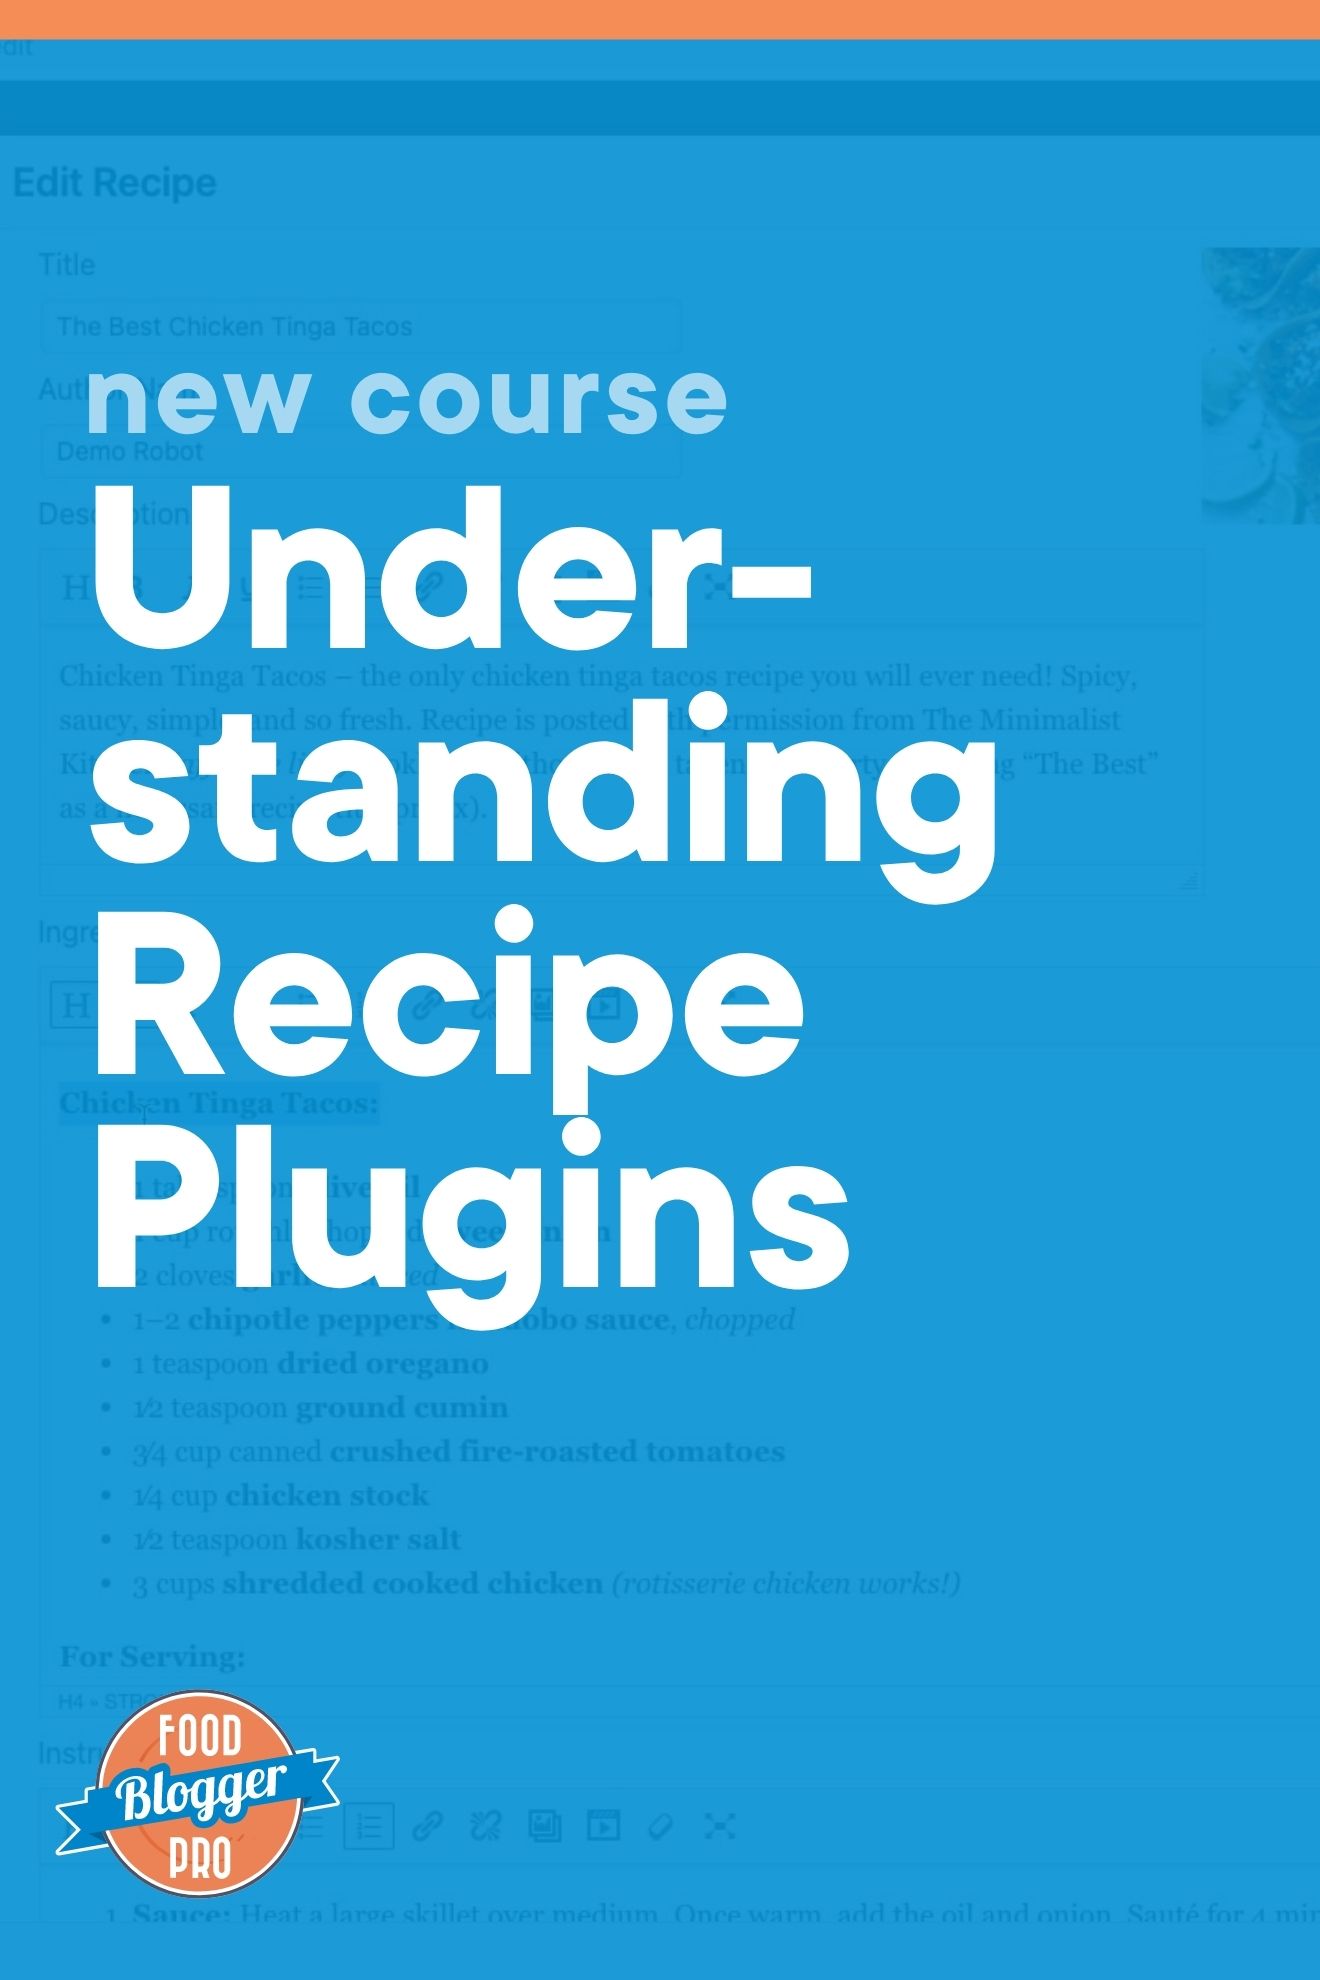 Blue graphic that reads 'New Course: Understanding Recipe Plugins' with Food Blogger Pro logo at the bottom